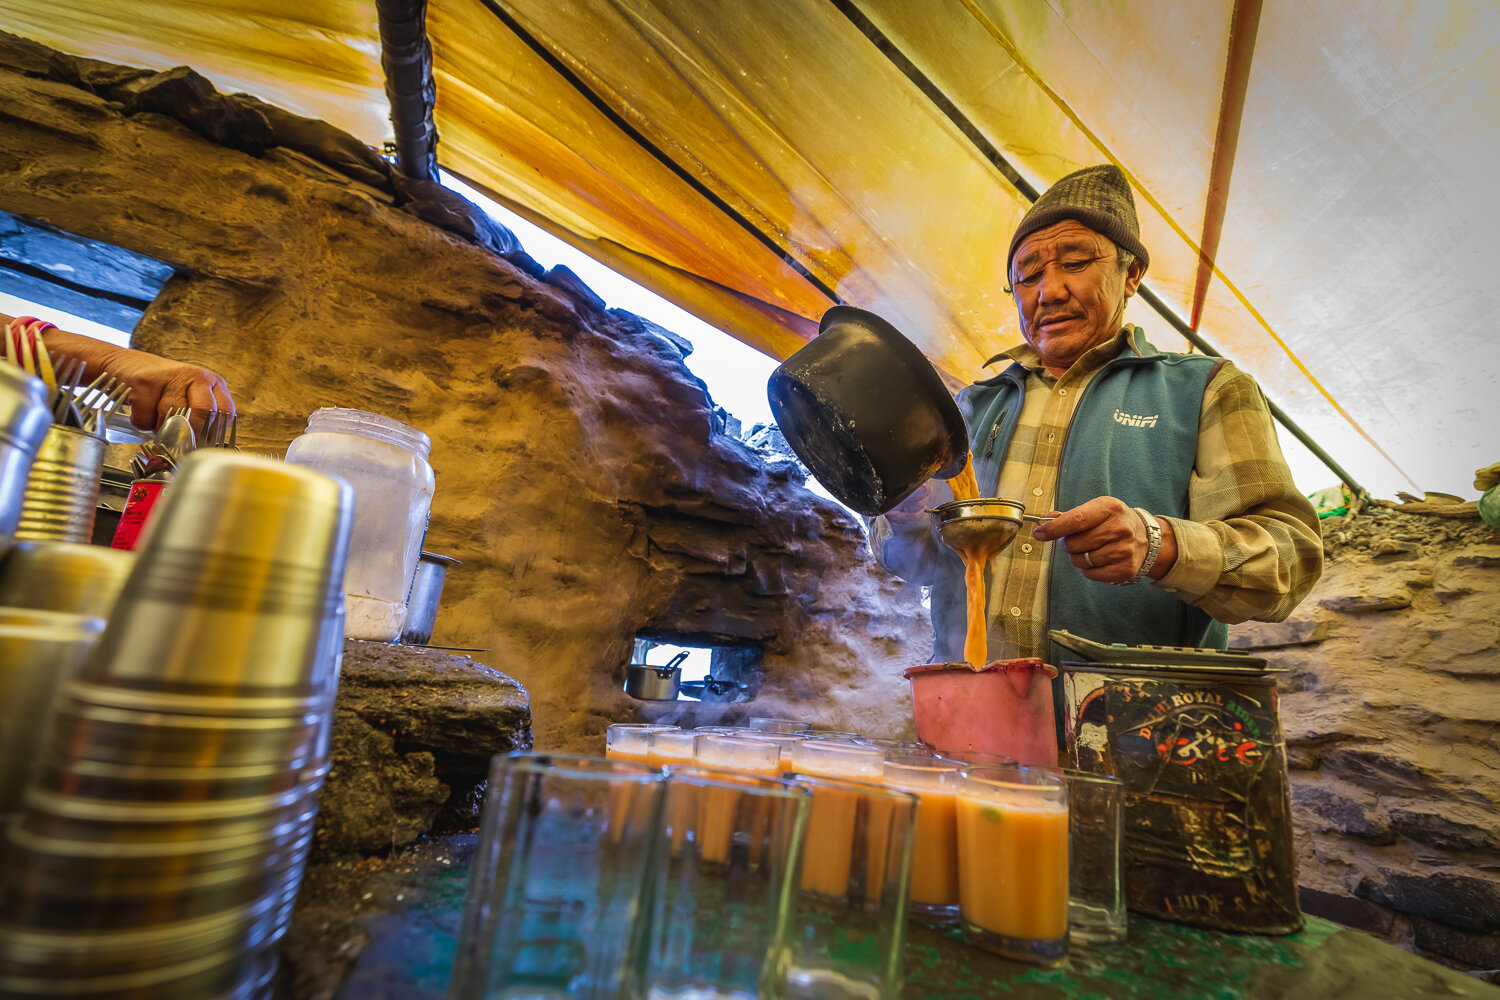 famous chacha chachi dhaba in spiti valley 2 by prathamesh dixit.jpg